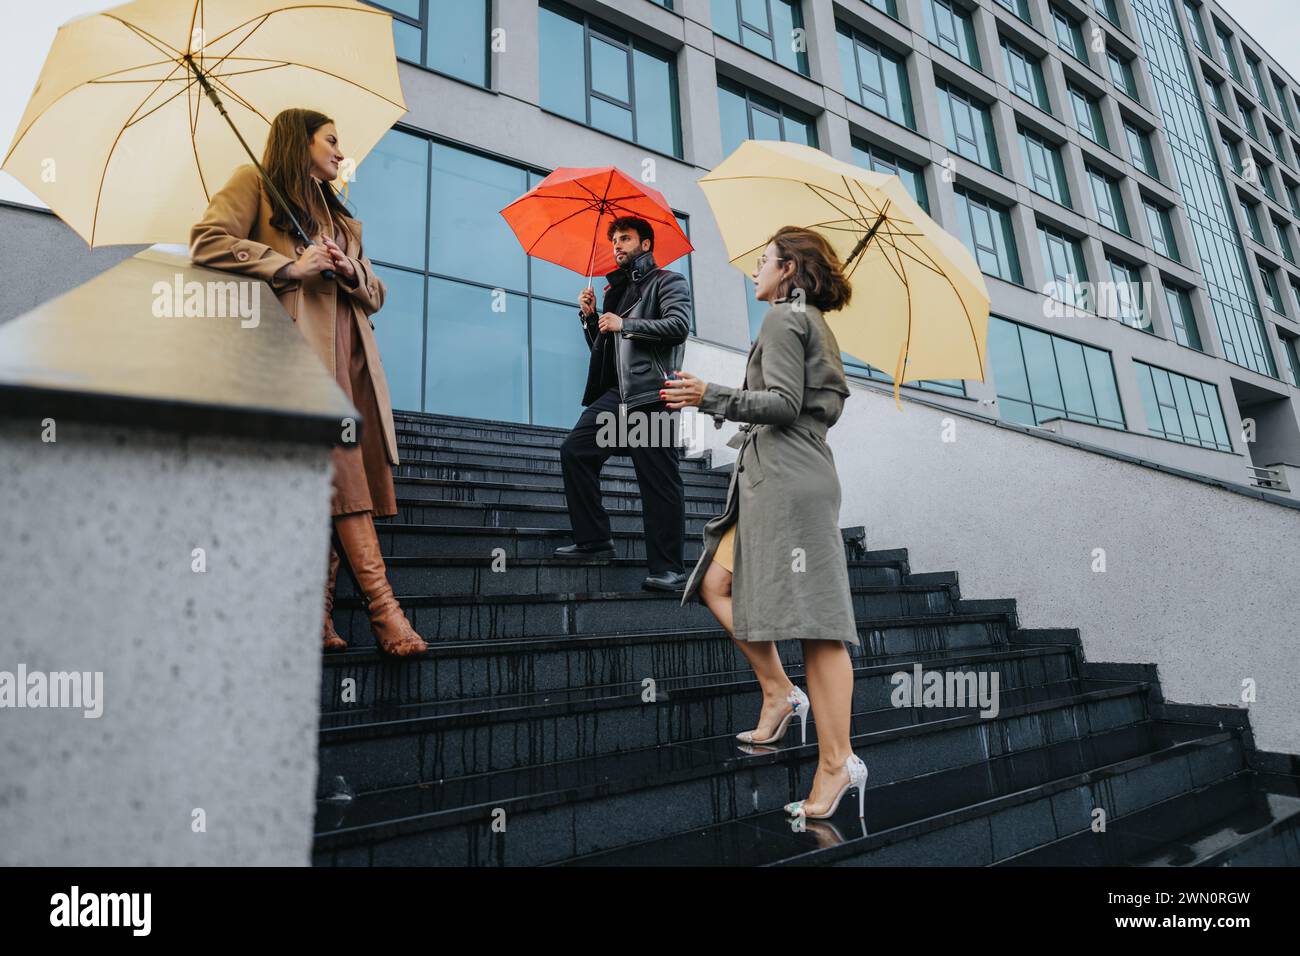 Three friends enjoy joyful moment together under vibrant yellow and red umbrellas on city steps on a rainy day, showcasing urban life and friendship. Stock Photo